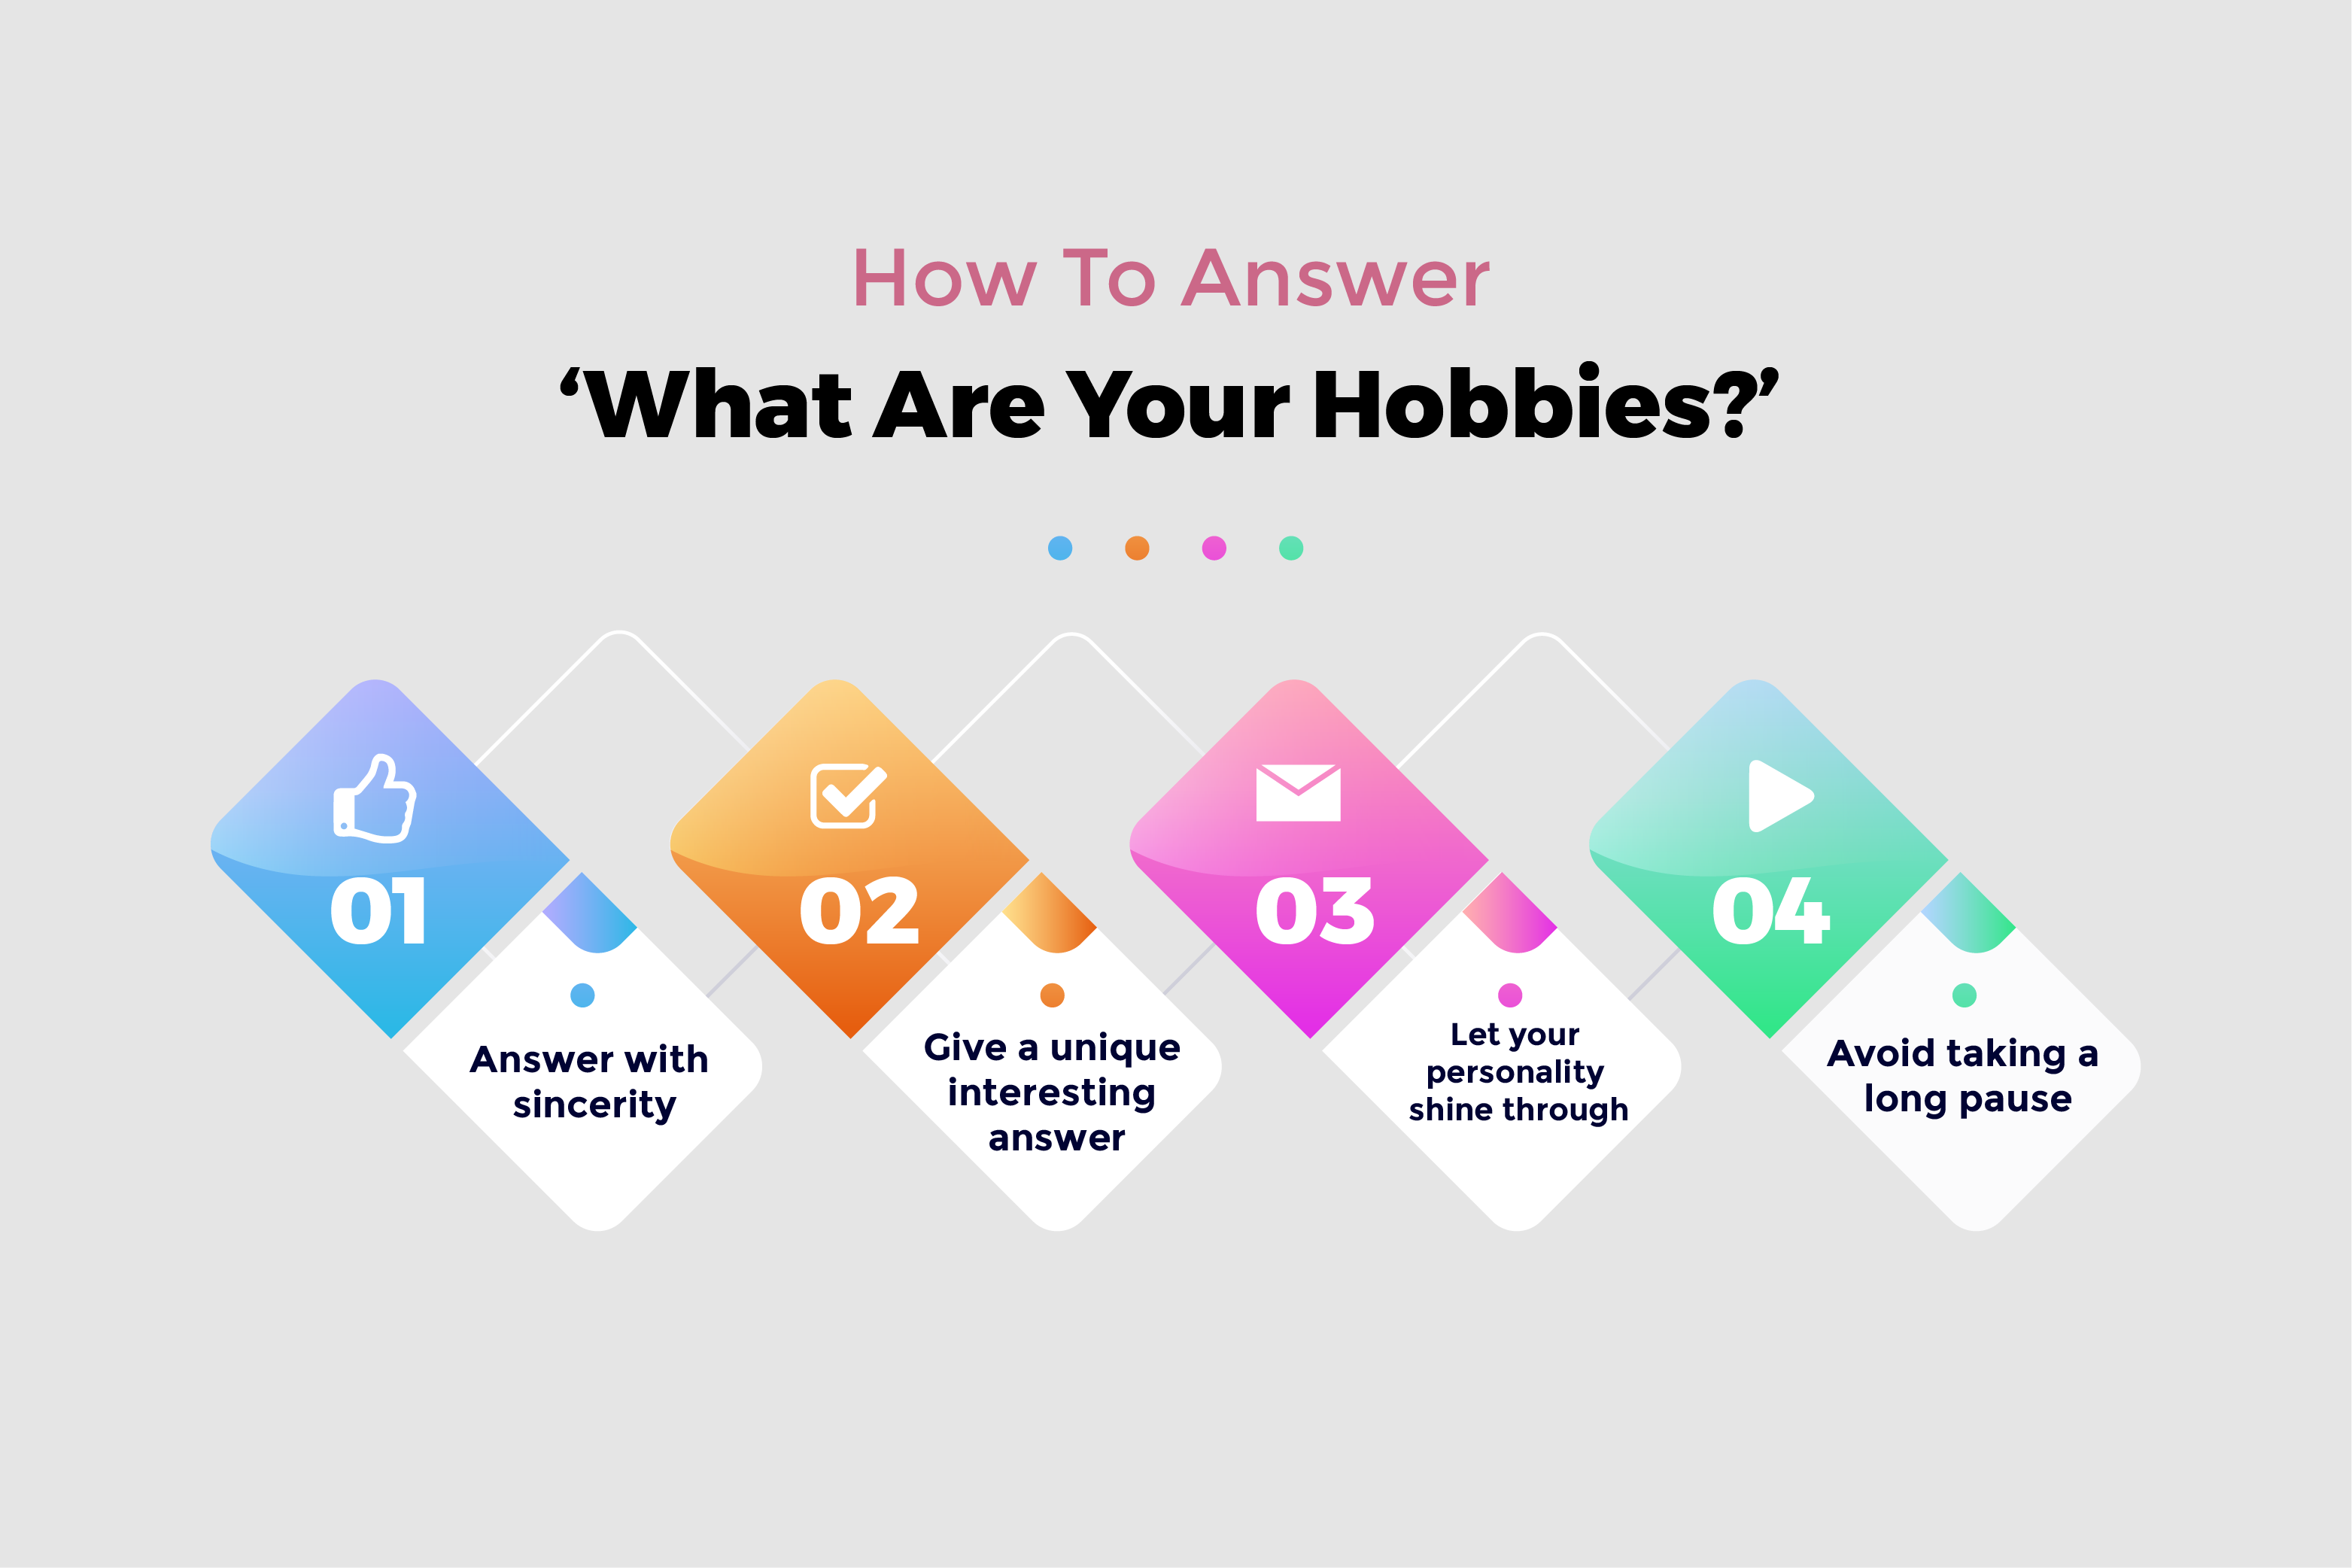 How To Answer ‘What Are Your Hobbies?’